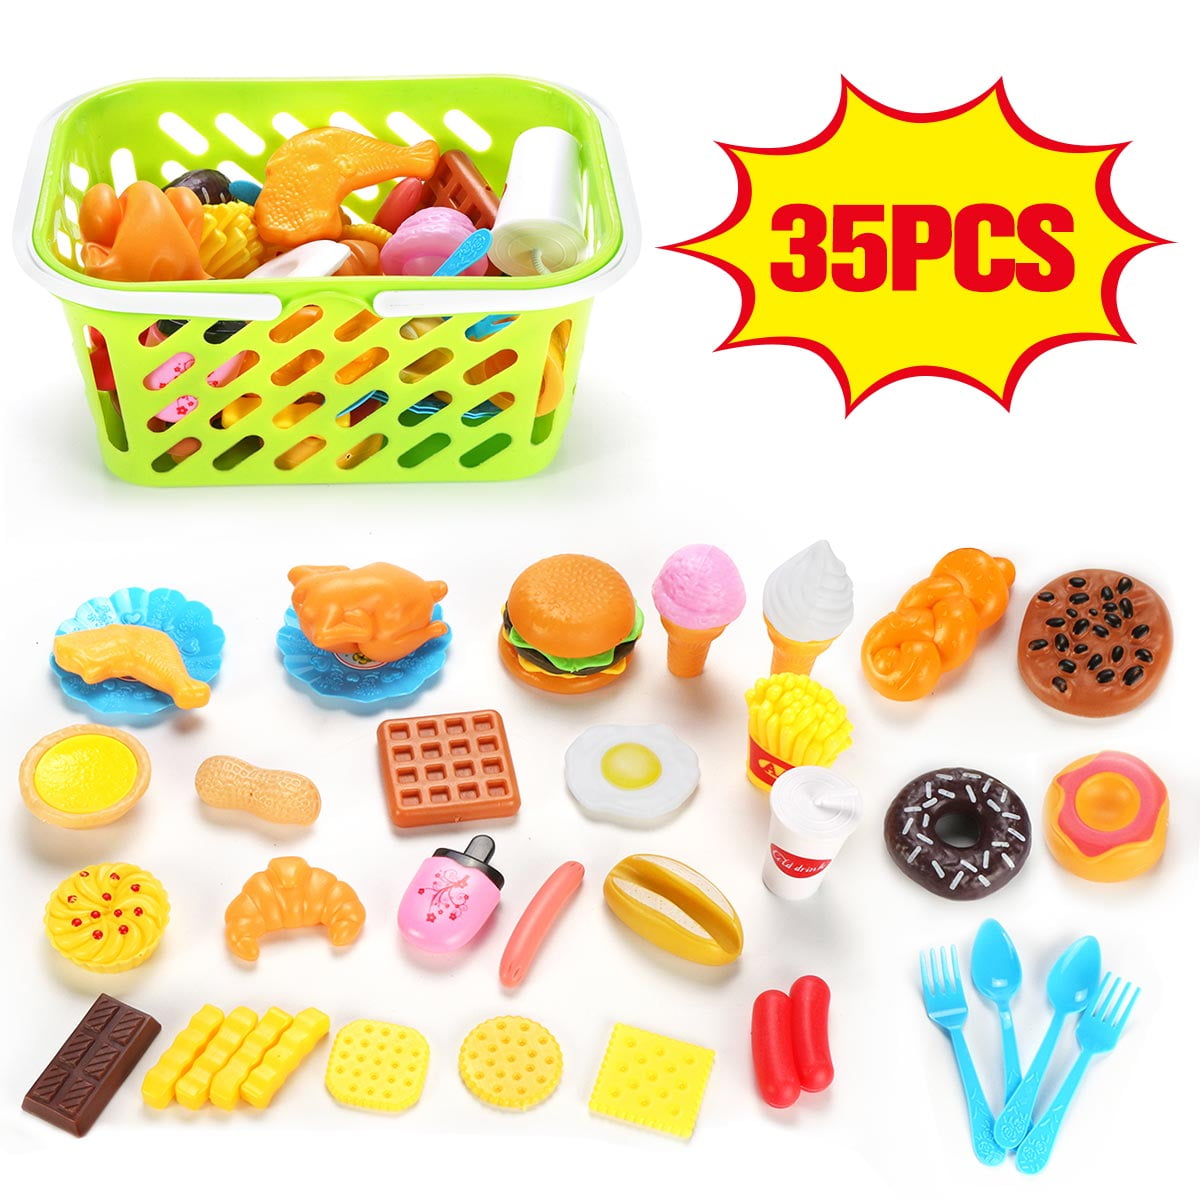 Plastic Fast Food Playset Mini Food Toy Children Pretend Play Gift for Kids New 